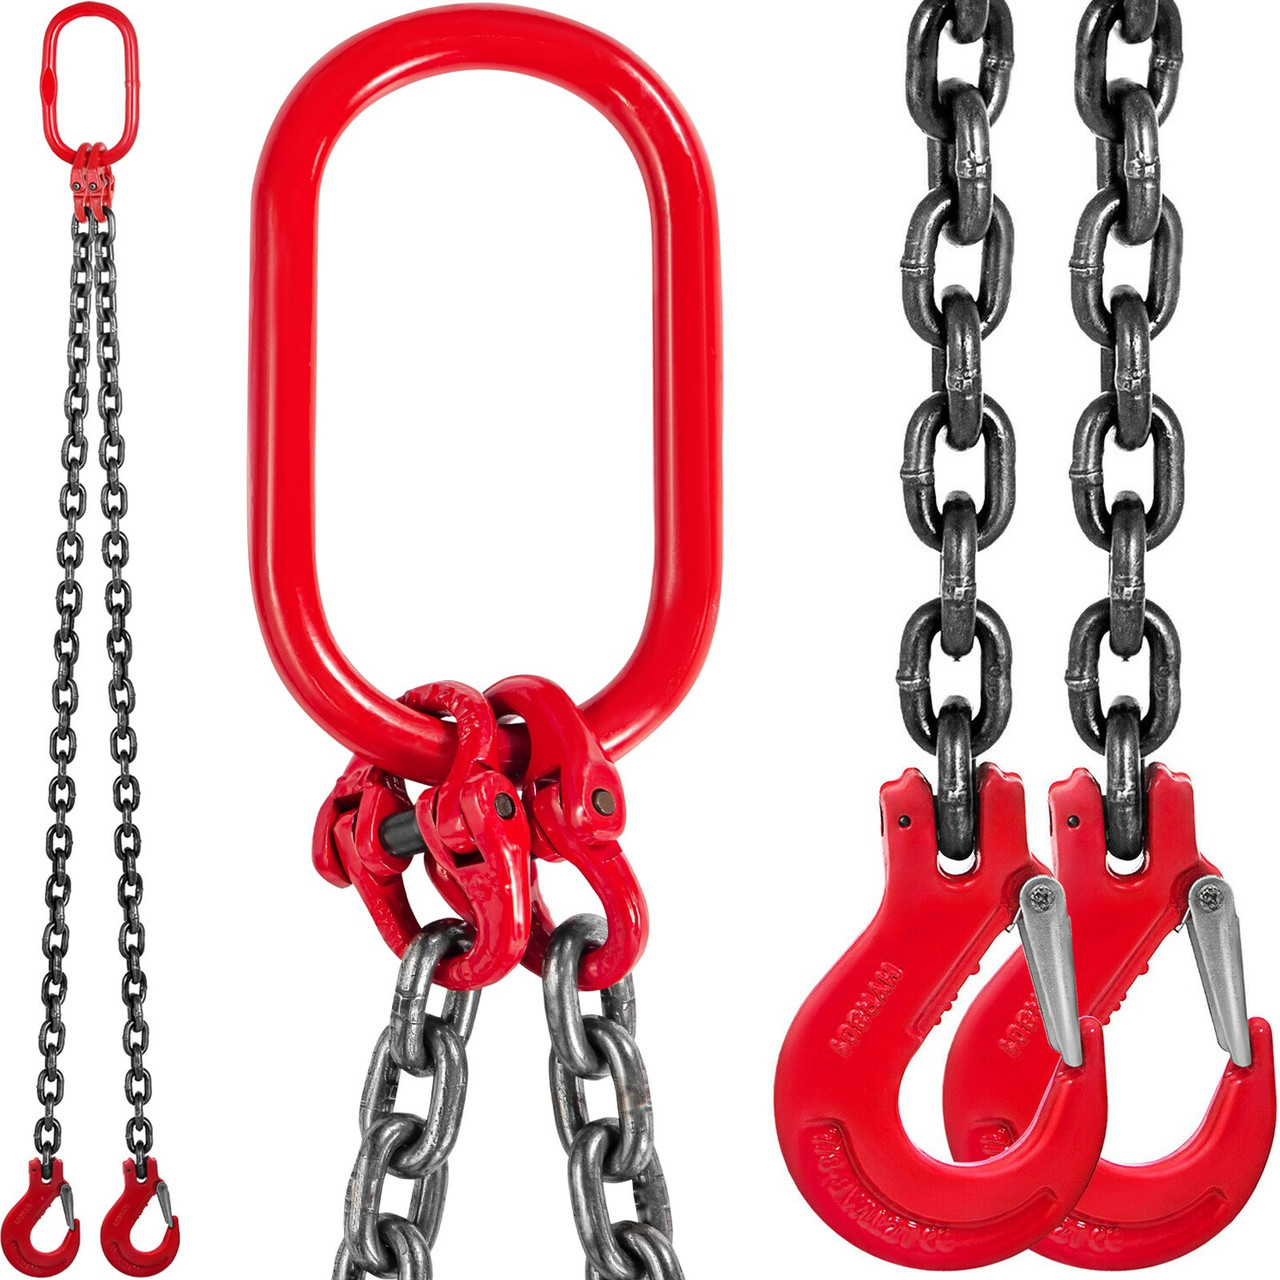 6FT Chain Sling 5/16 in x 6 ft Double Leg with Grab Hooks Sling Chain 3T Capacity Double Leg Chain Sling Grade80 (0.31In x 6Ft Double Leg Sling)